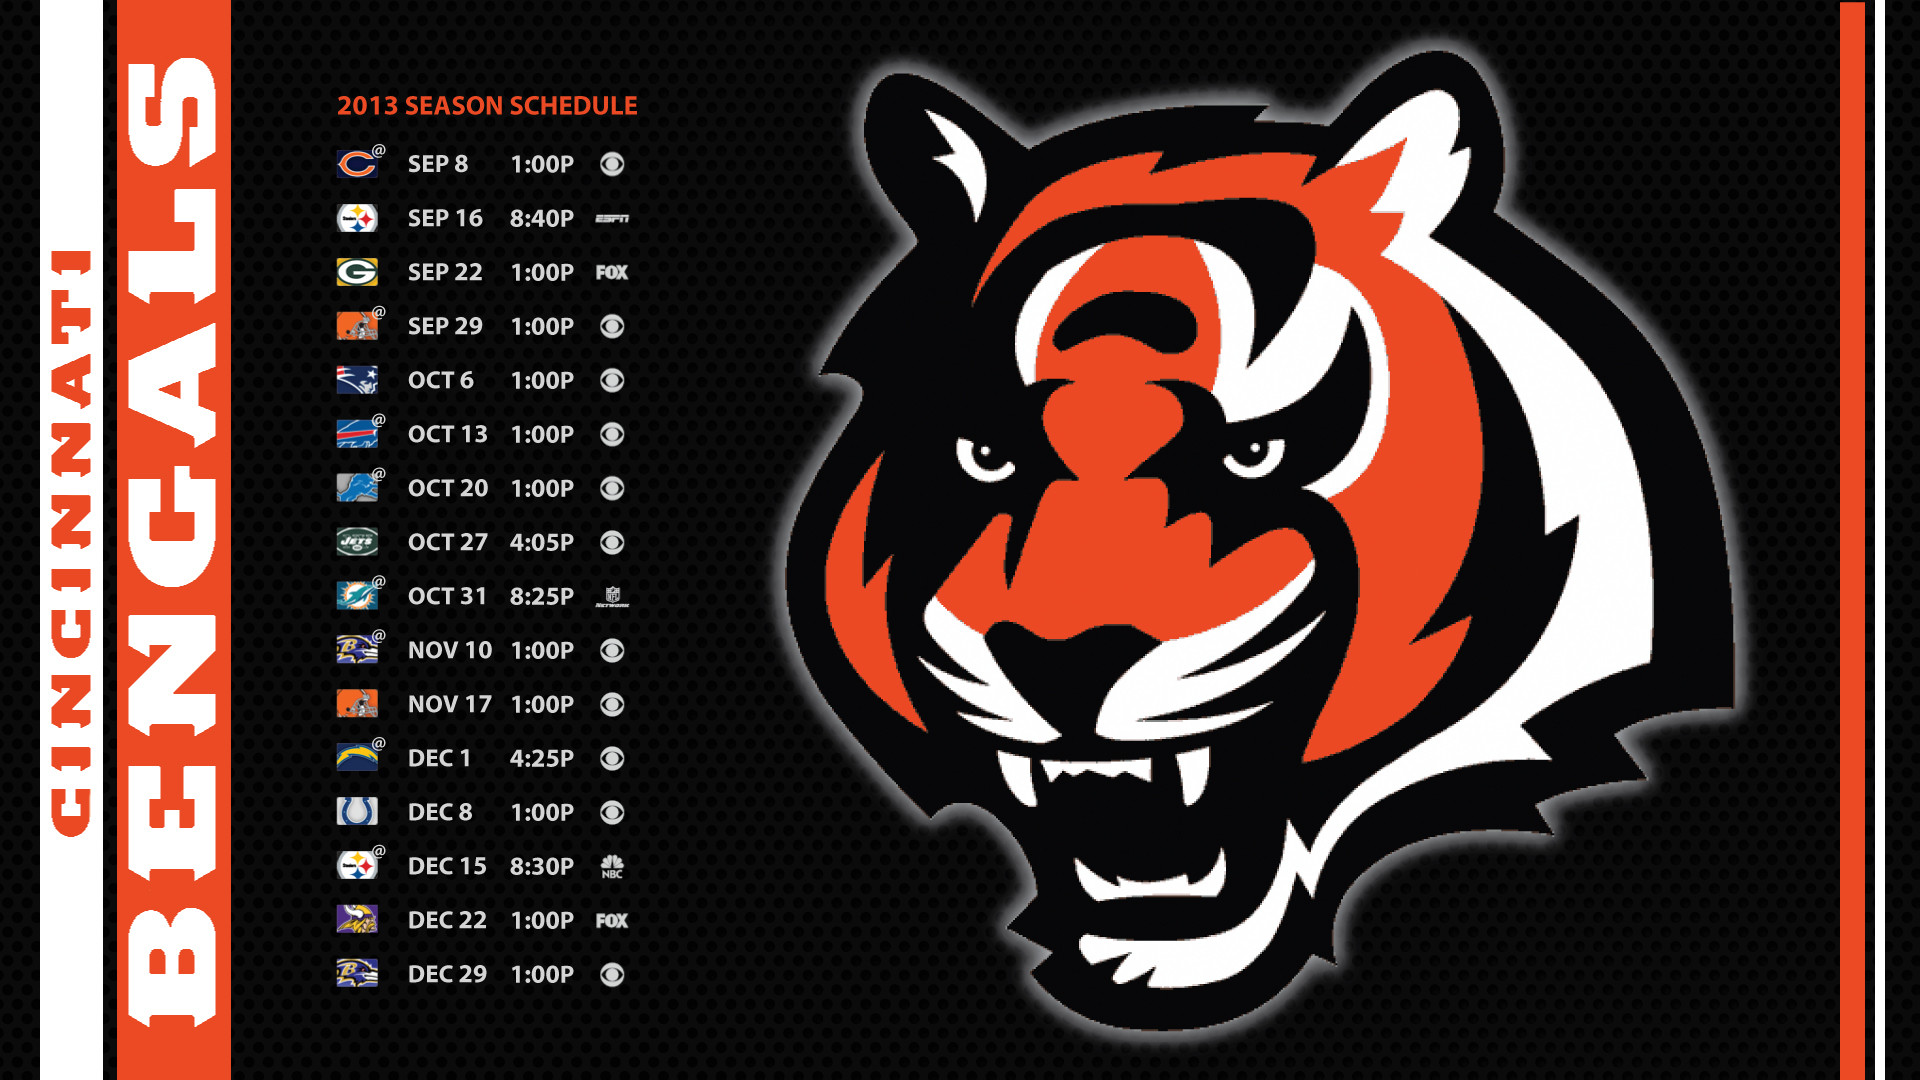 1920x1080 wallpaper images you would like us to post on bengals.com?